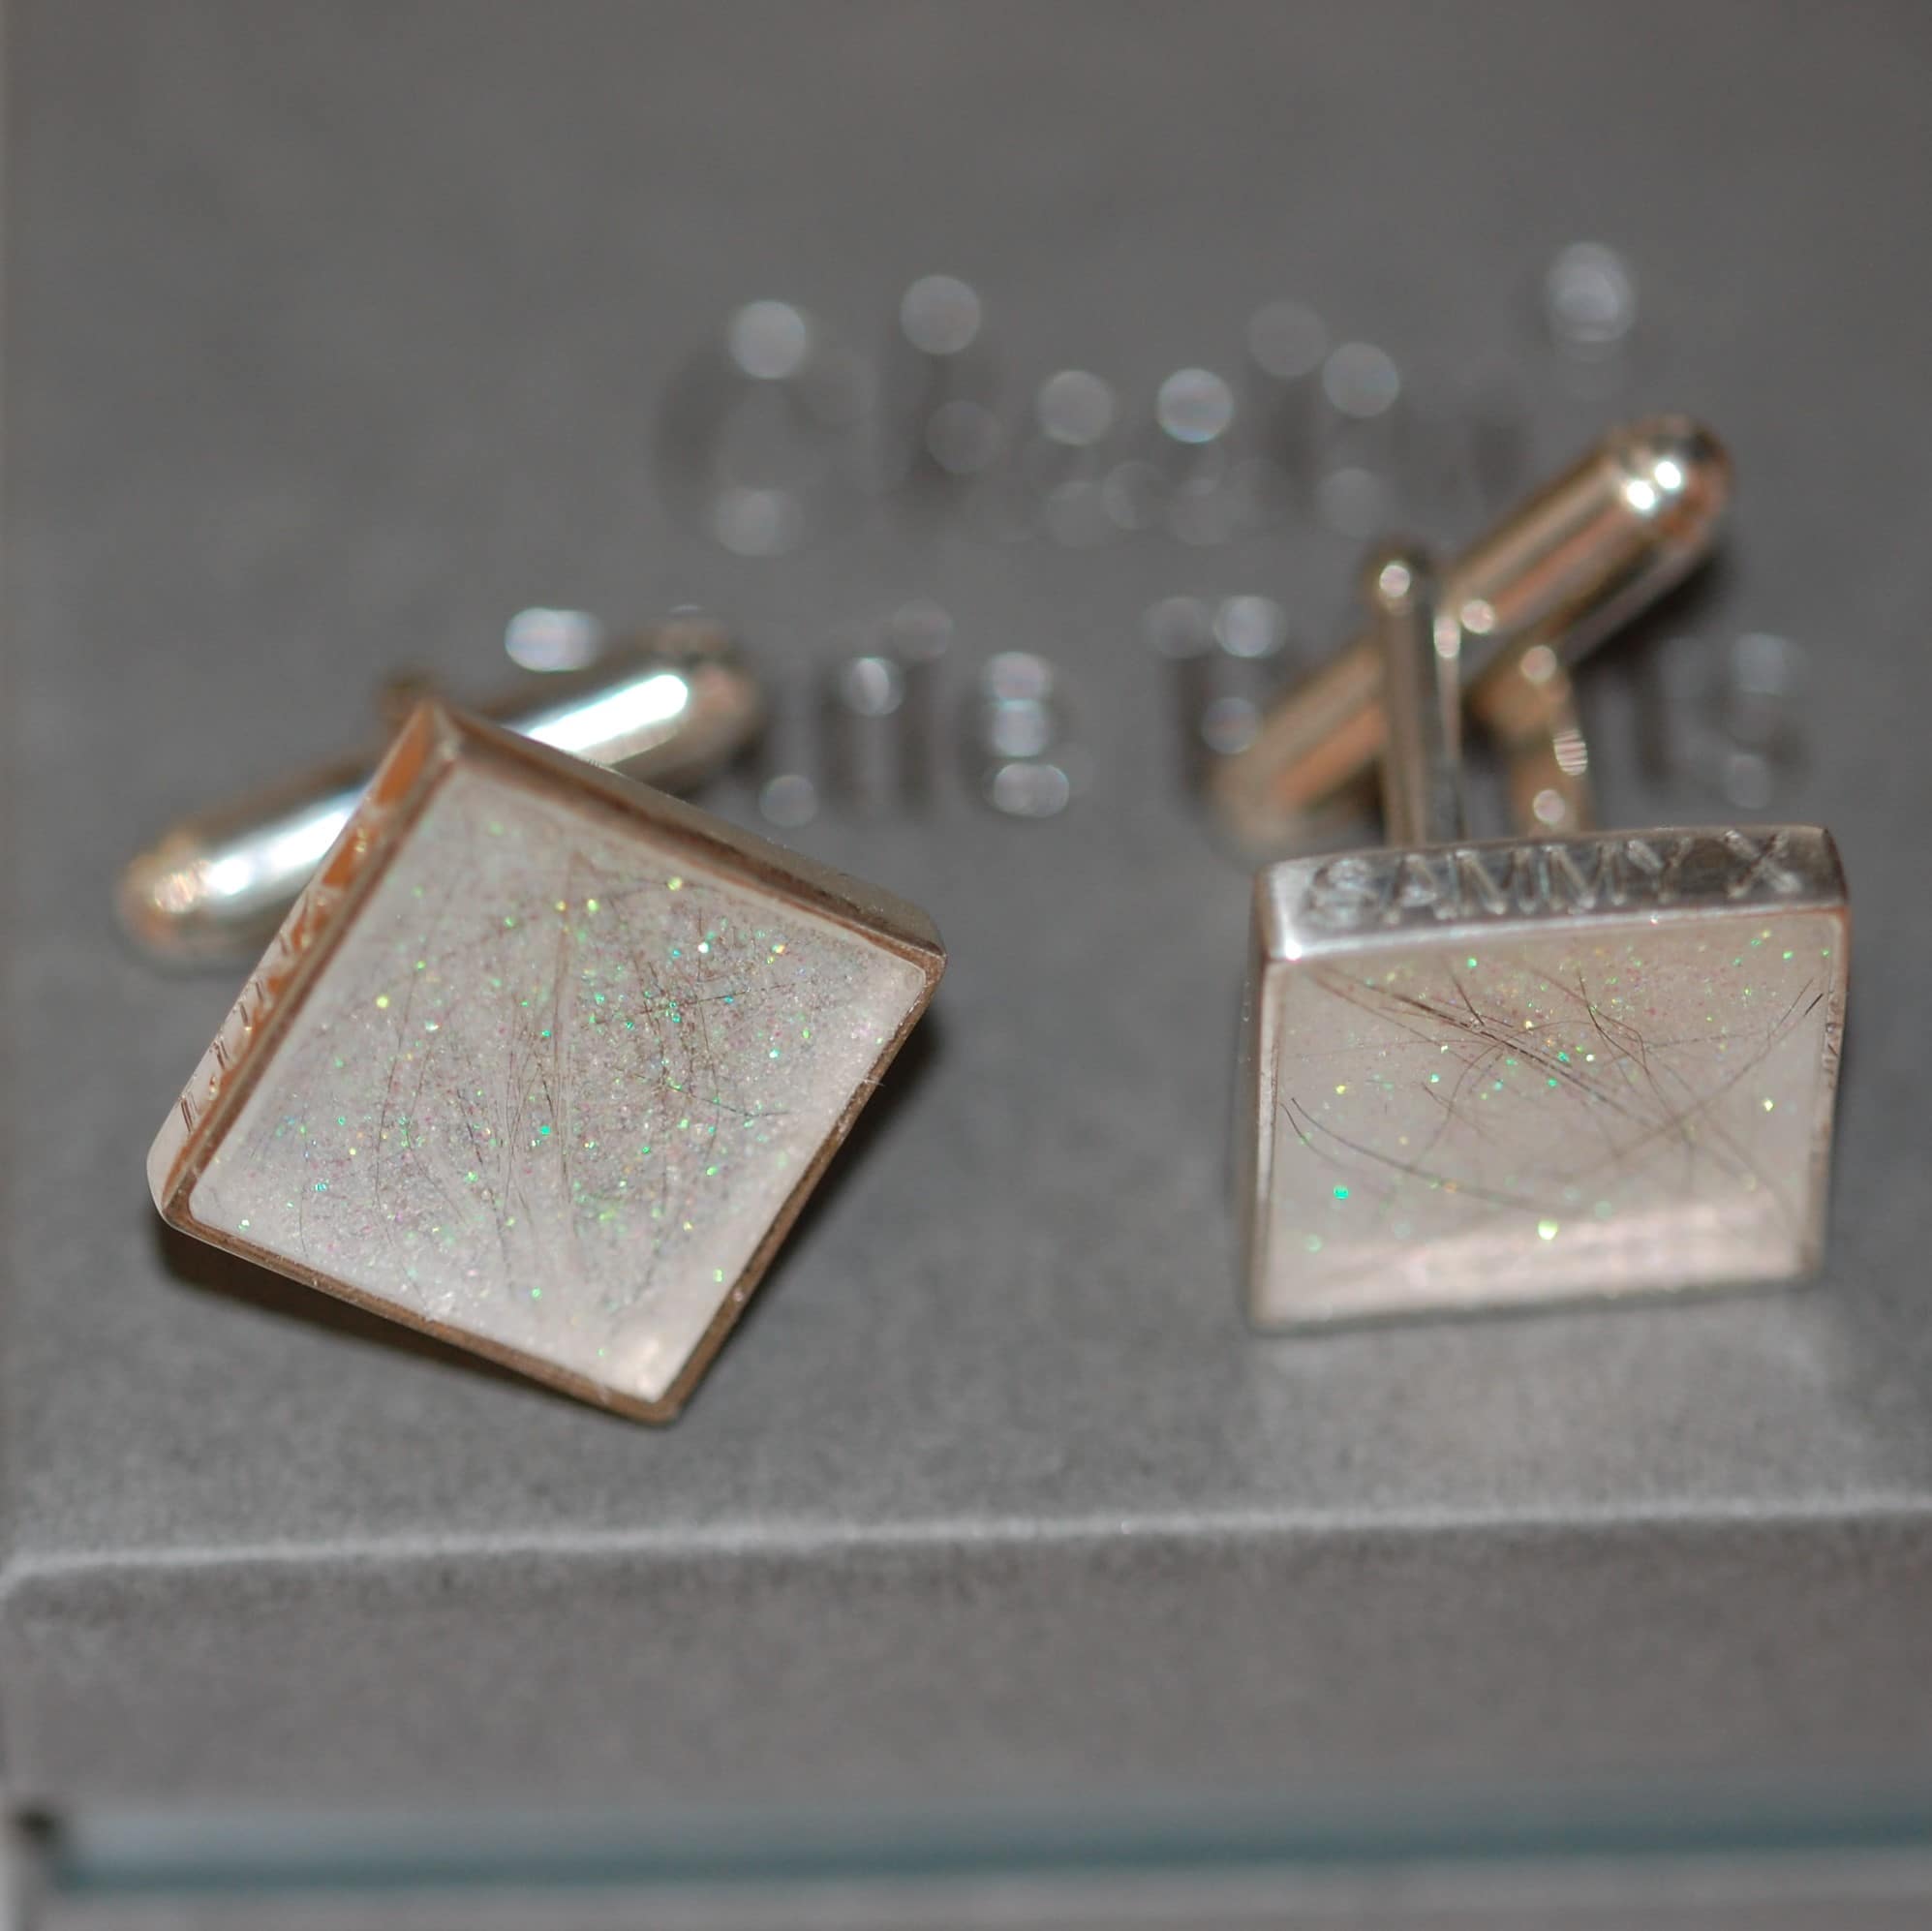 Silver cufflinks with pet fur or cremation ashes